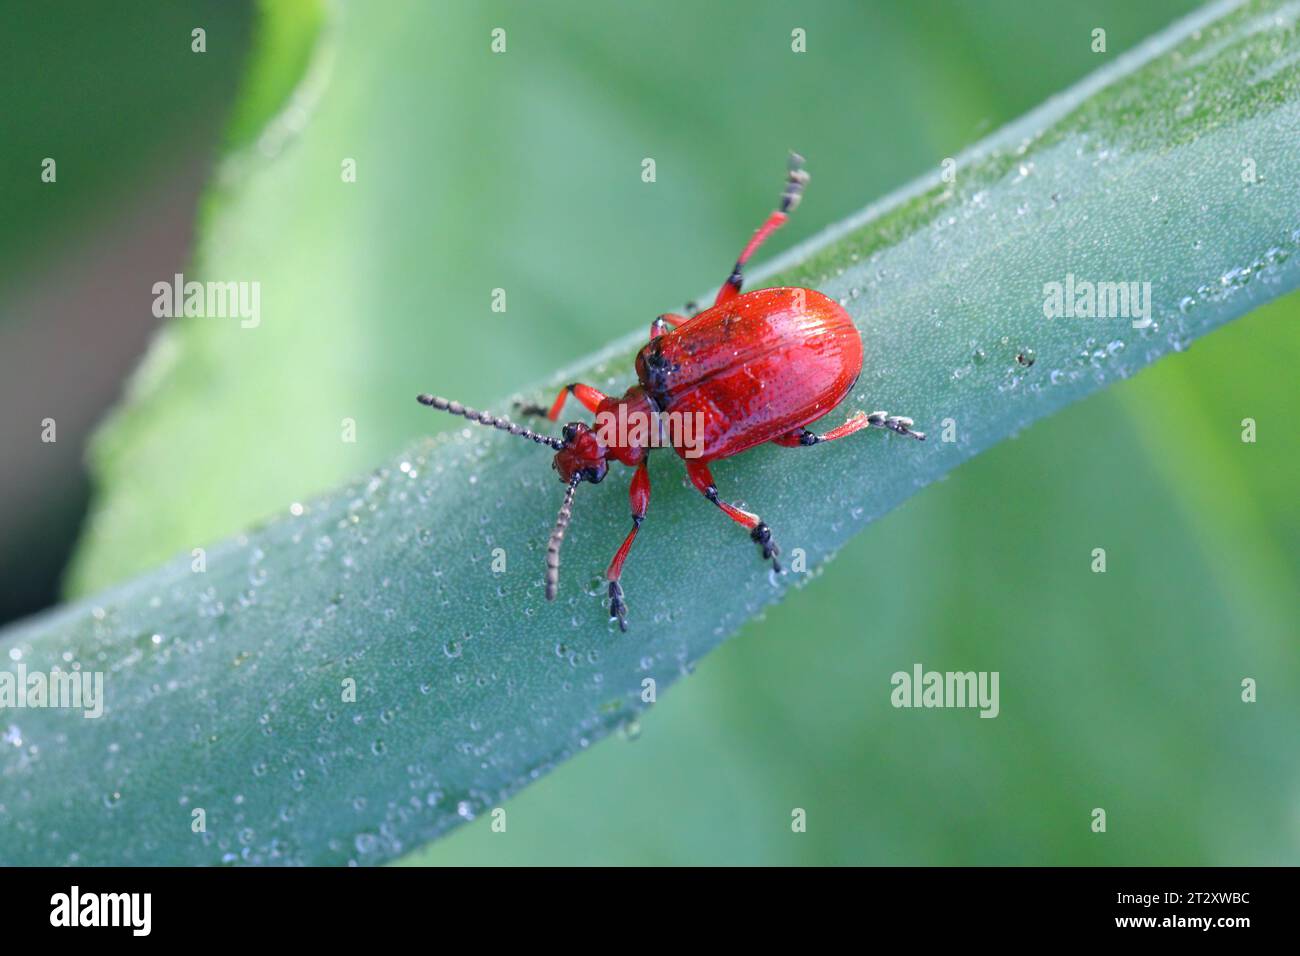 Onion beetle, latin name is Lilioceris merdigera. A beetle of family Chrysomelidae, commonly known as leaf beetles, a pest of onions, chives, leeks... Stock Photo